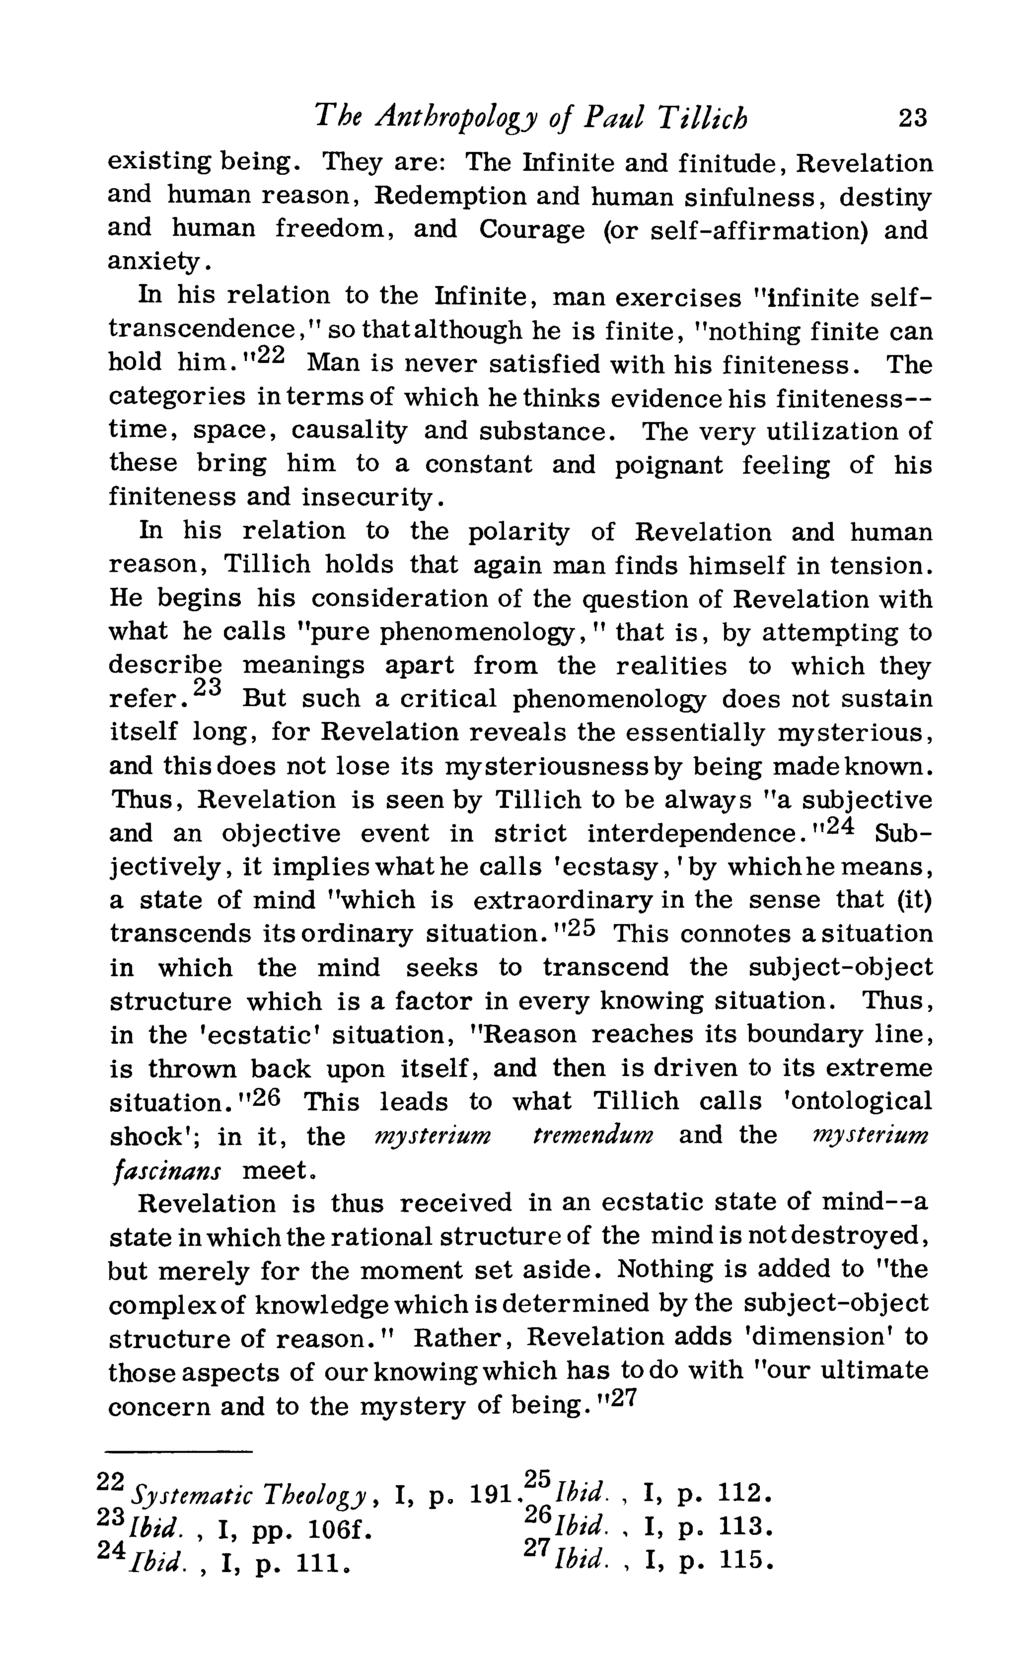 The Anthropology of Paul Tillich 23 existing being They are: The Infinite and finitude Revelation and human reason Redemption and human sinfulness destiny and human freedom and Courage (or